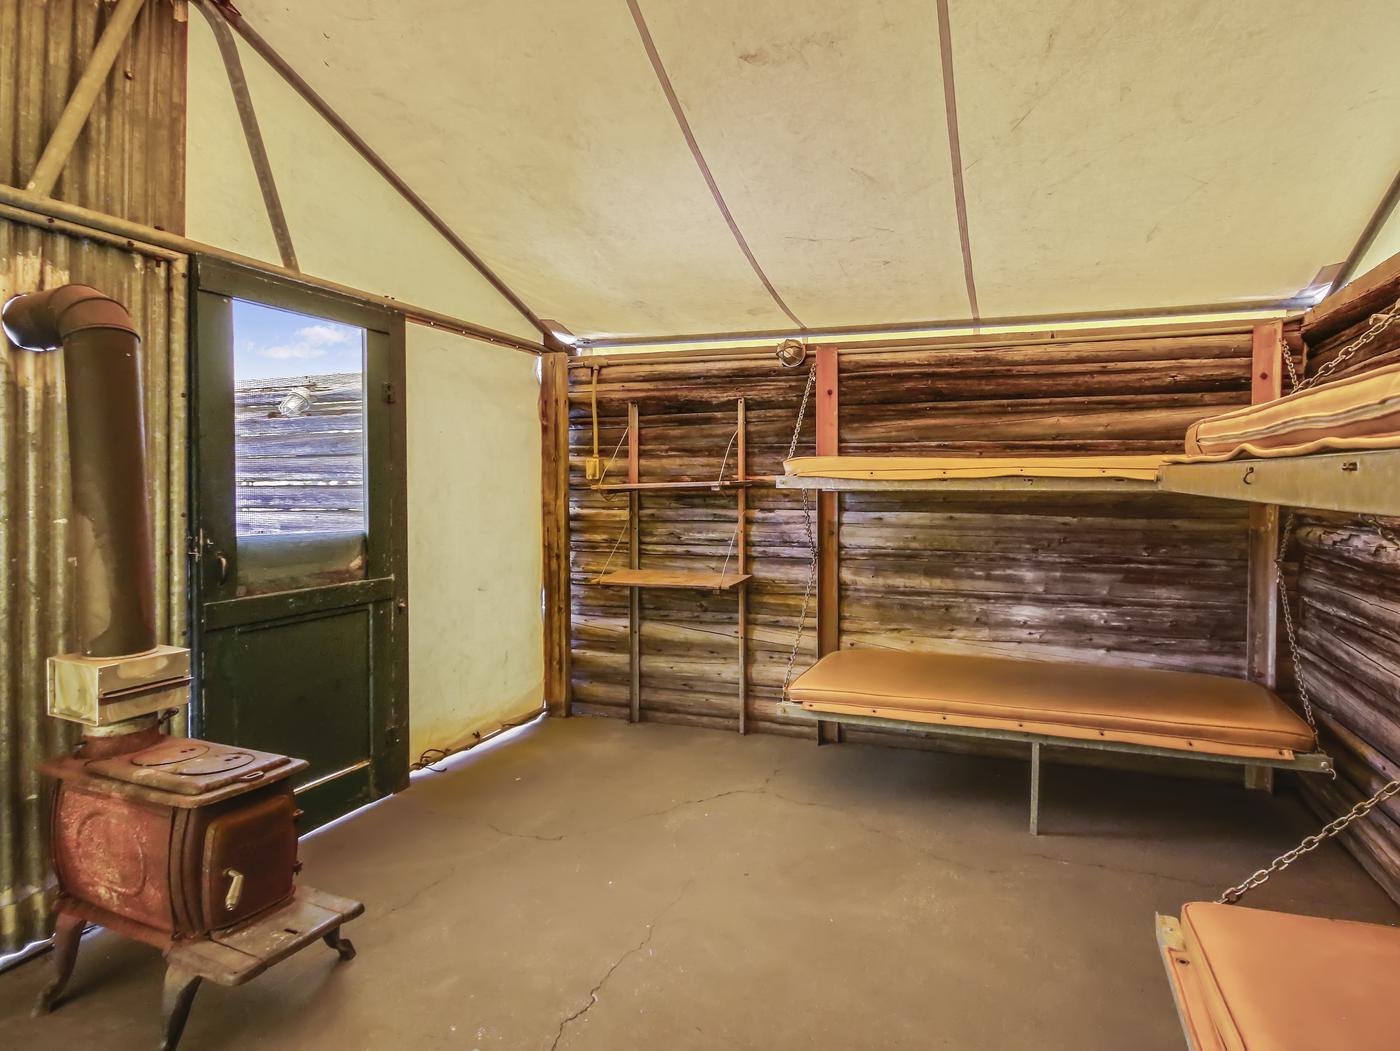 Canvas roof with log walls, wood stove, and bunk beds